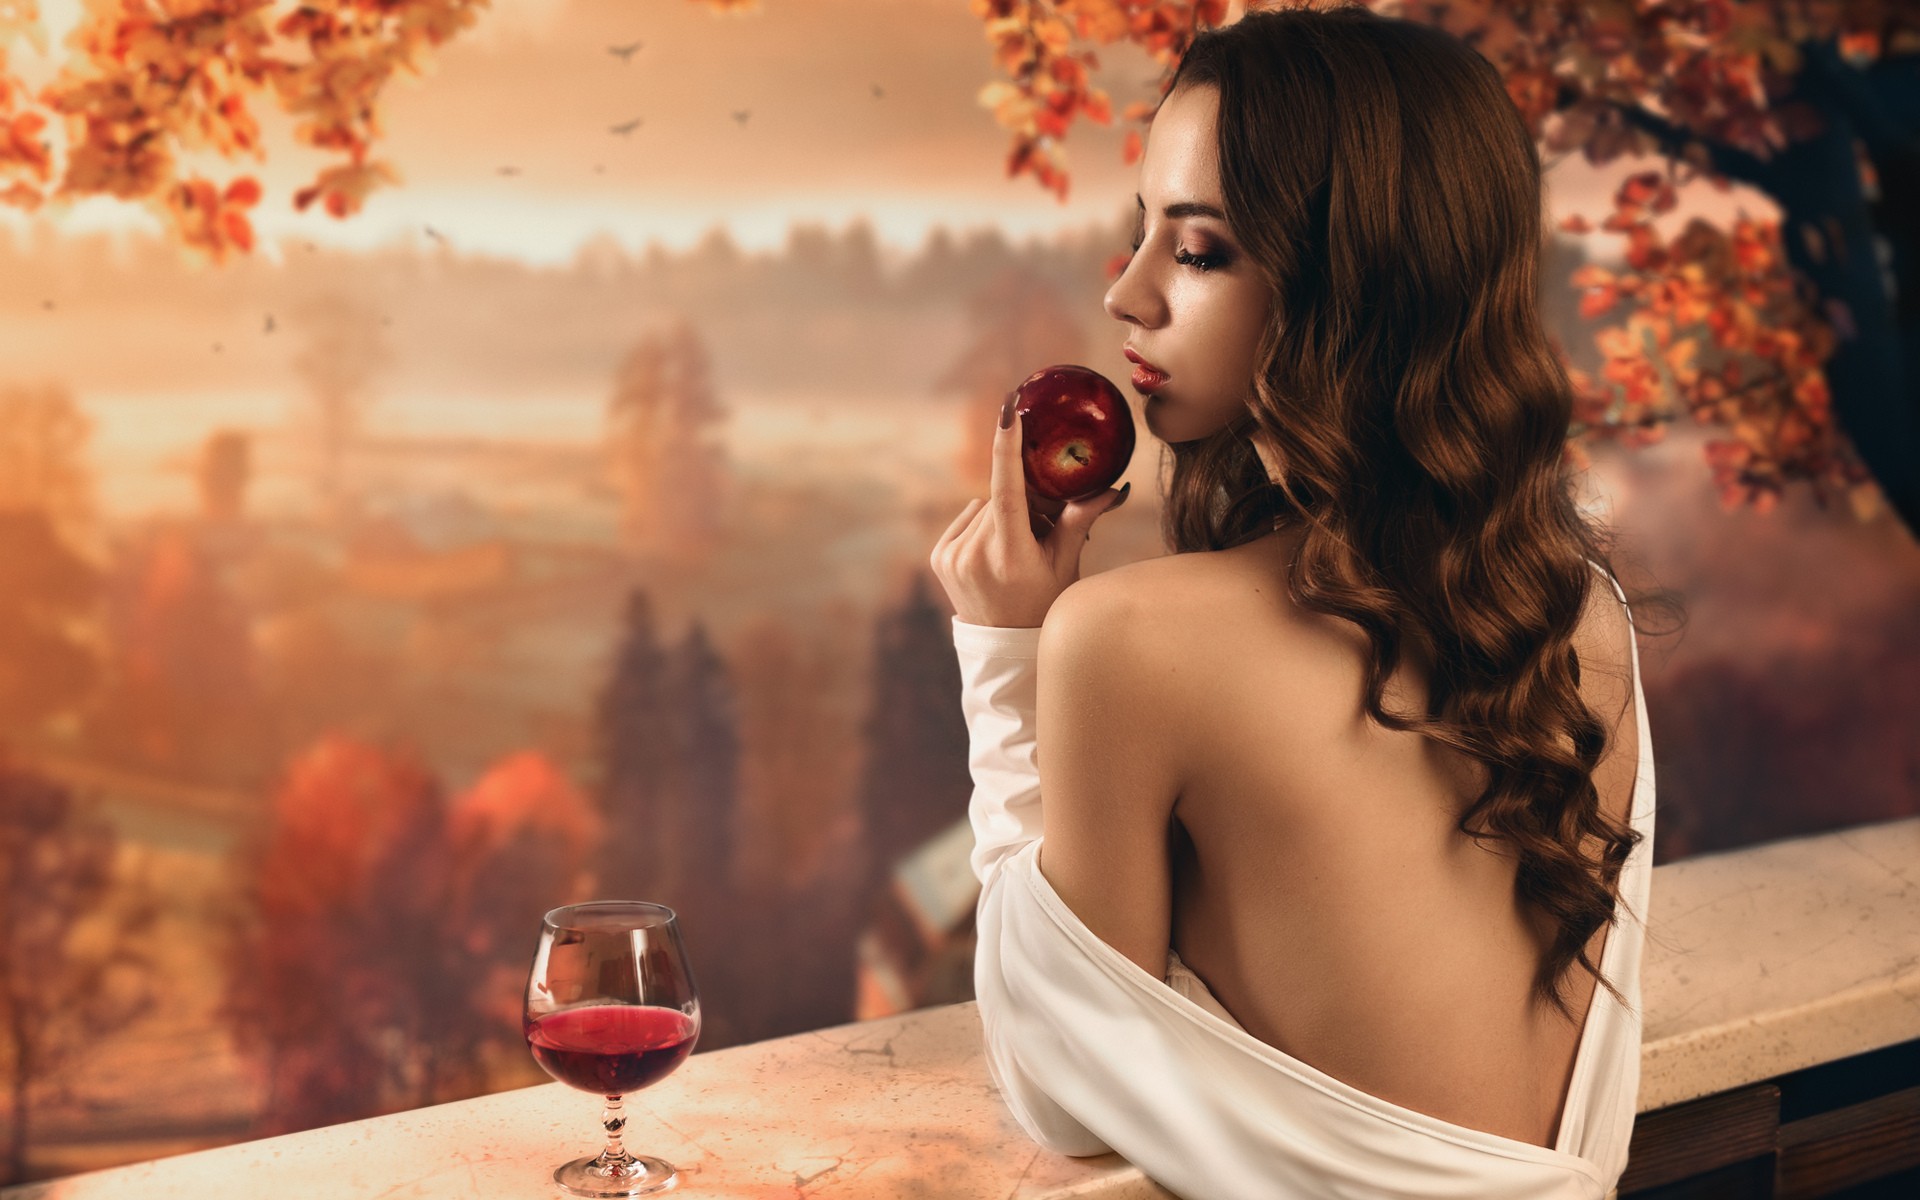 People 1920x1200 women model brunette long hair women outdoors trees nature white dress bare shoulders closed eyes open mouth apples glass wine fall leaves forest birds back bareback cropped